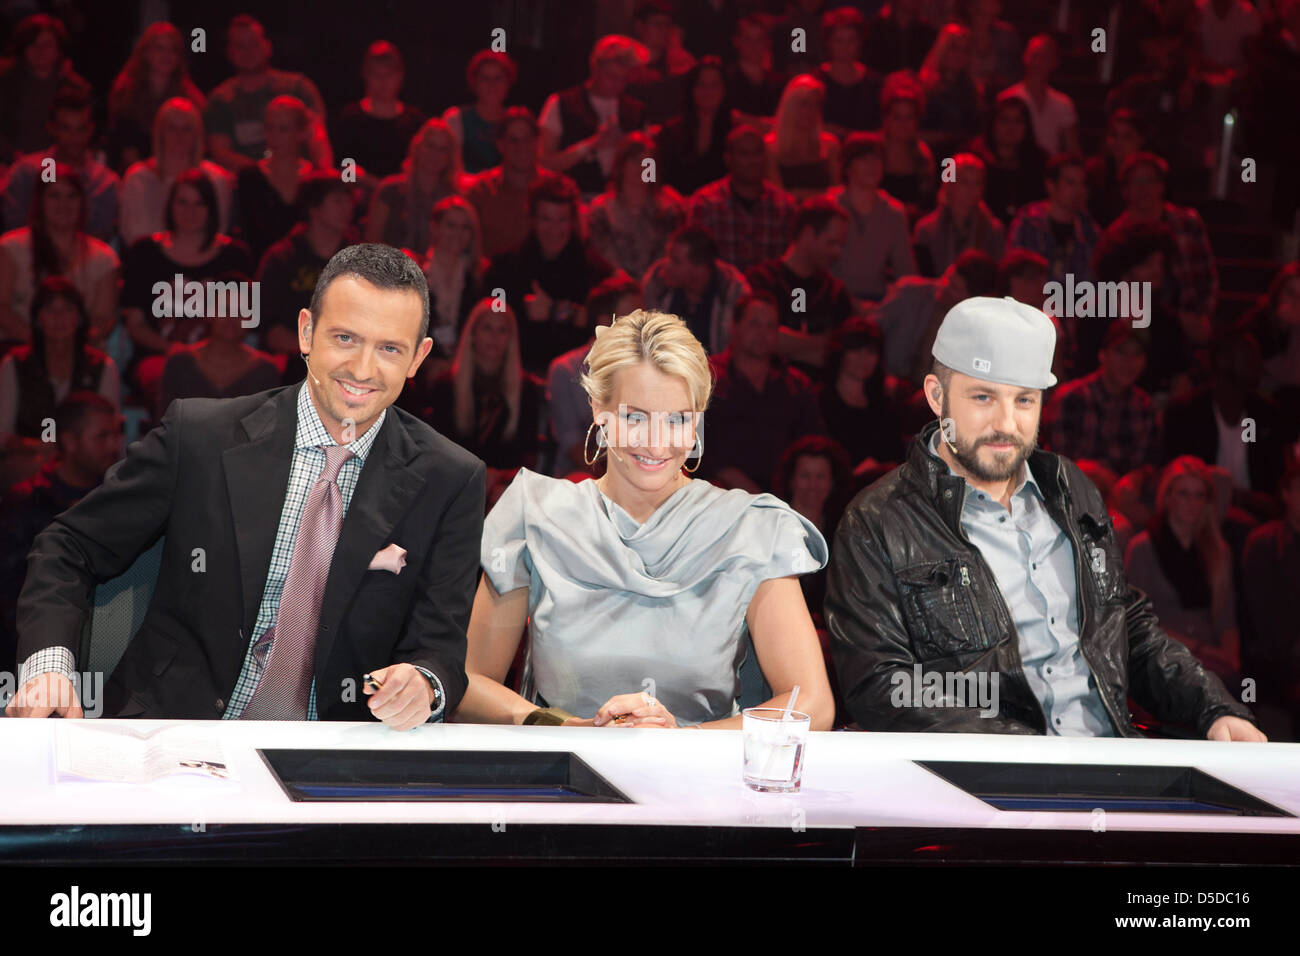 Till BrÃ¶nner, Sarah Connor, Das Bo at the X-Factor Show at MMC Coloneum. Cologne, Germany. 08.112011 Stock Photo